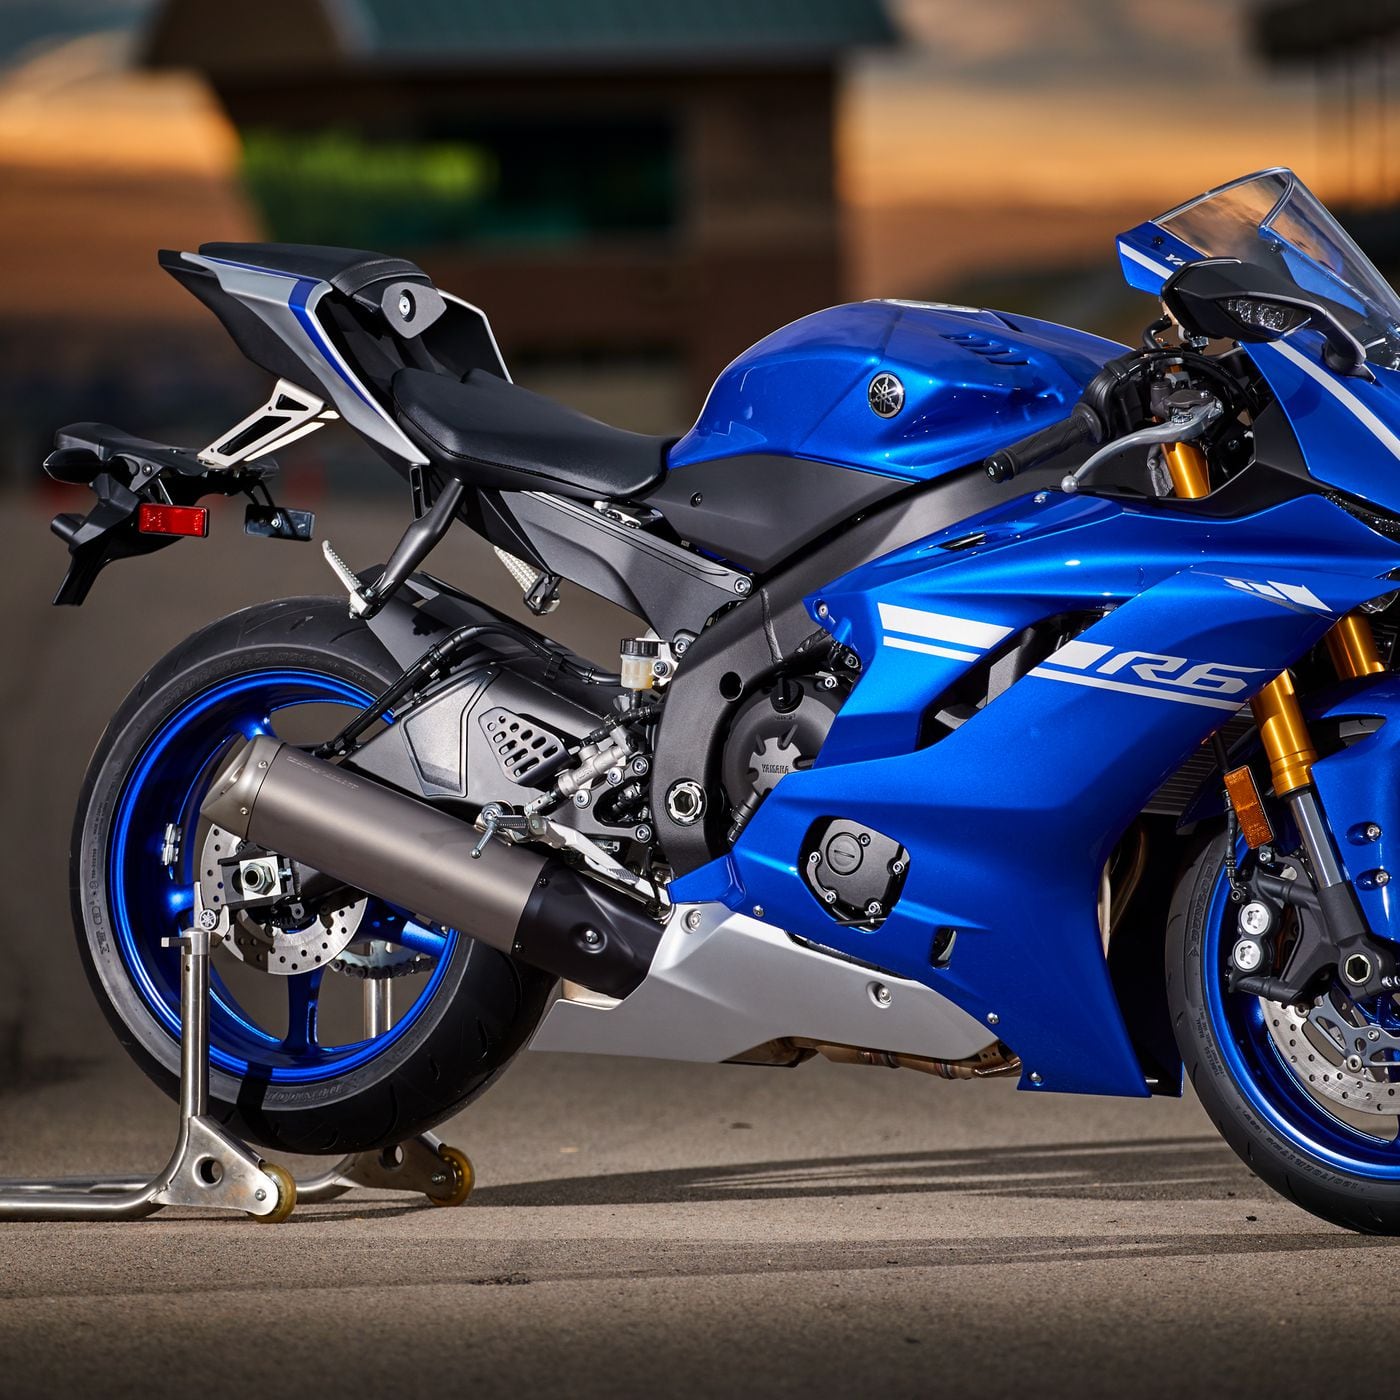 Gallery: Every Photo of the 2017 Yamaha YZF-R6 We Could Find